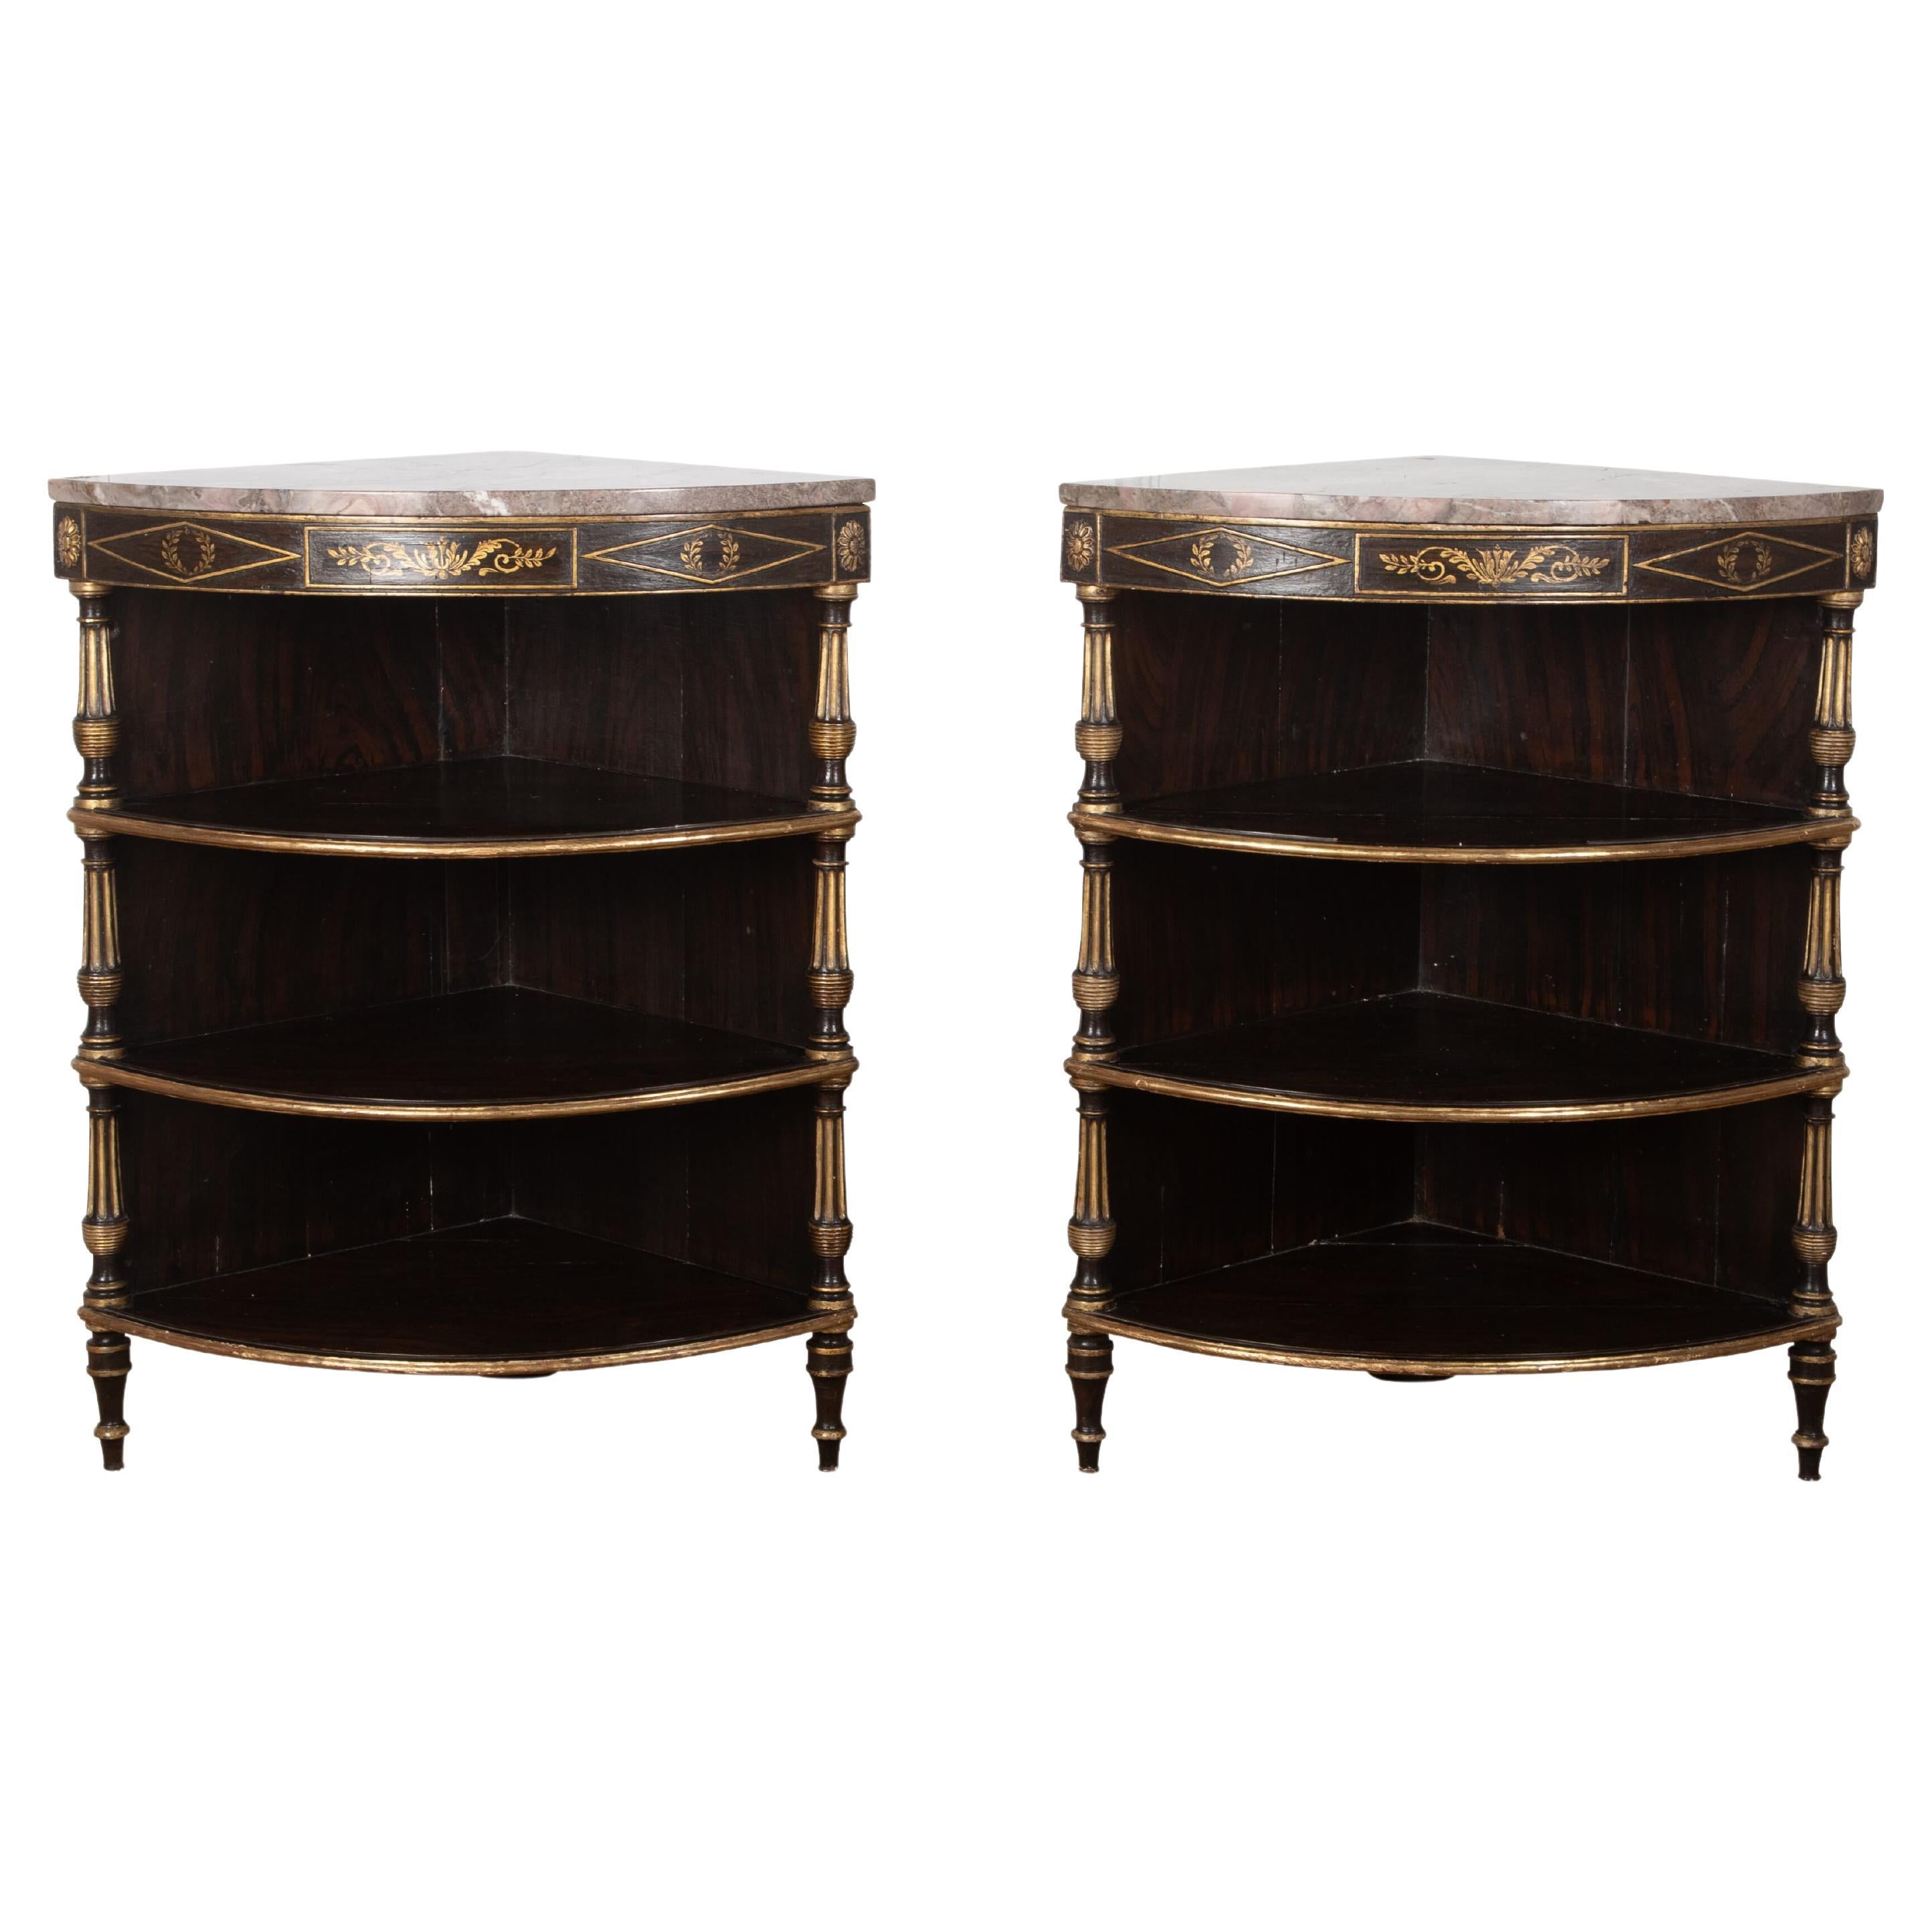 Regency Pair of Decorated & Marble Top Corner Cabinets